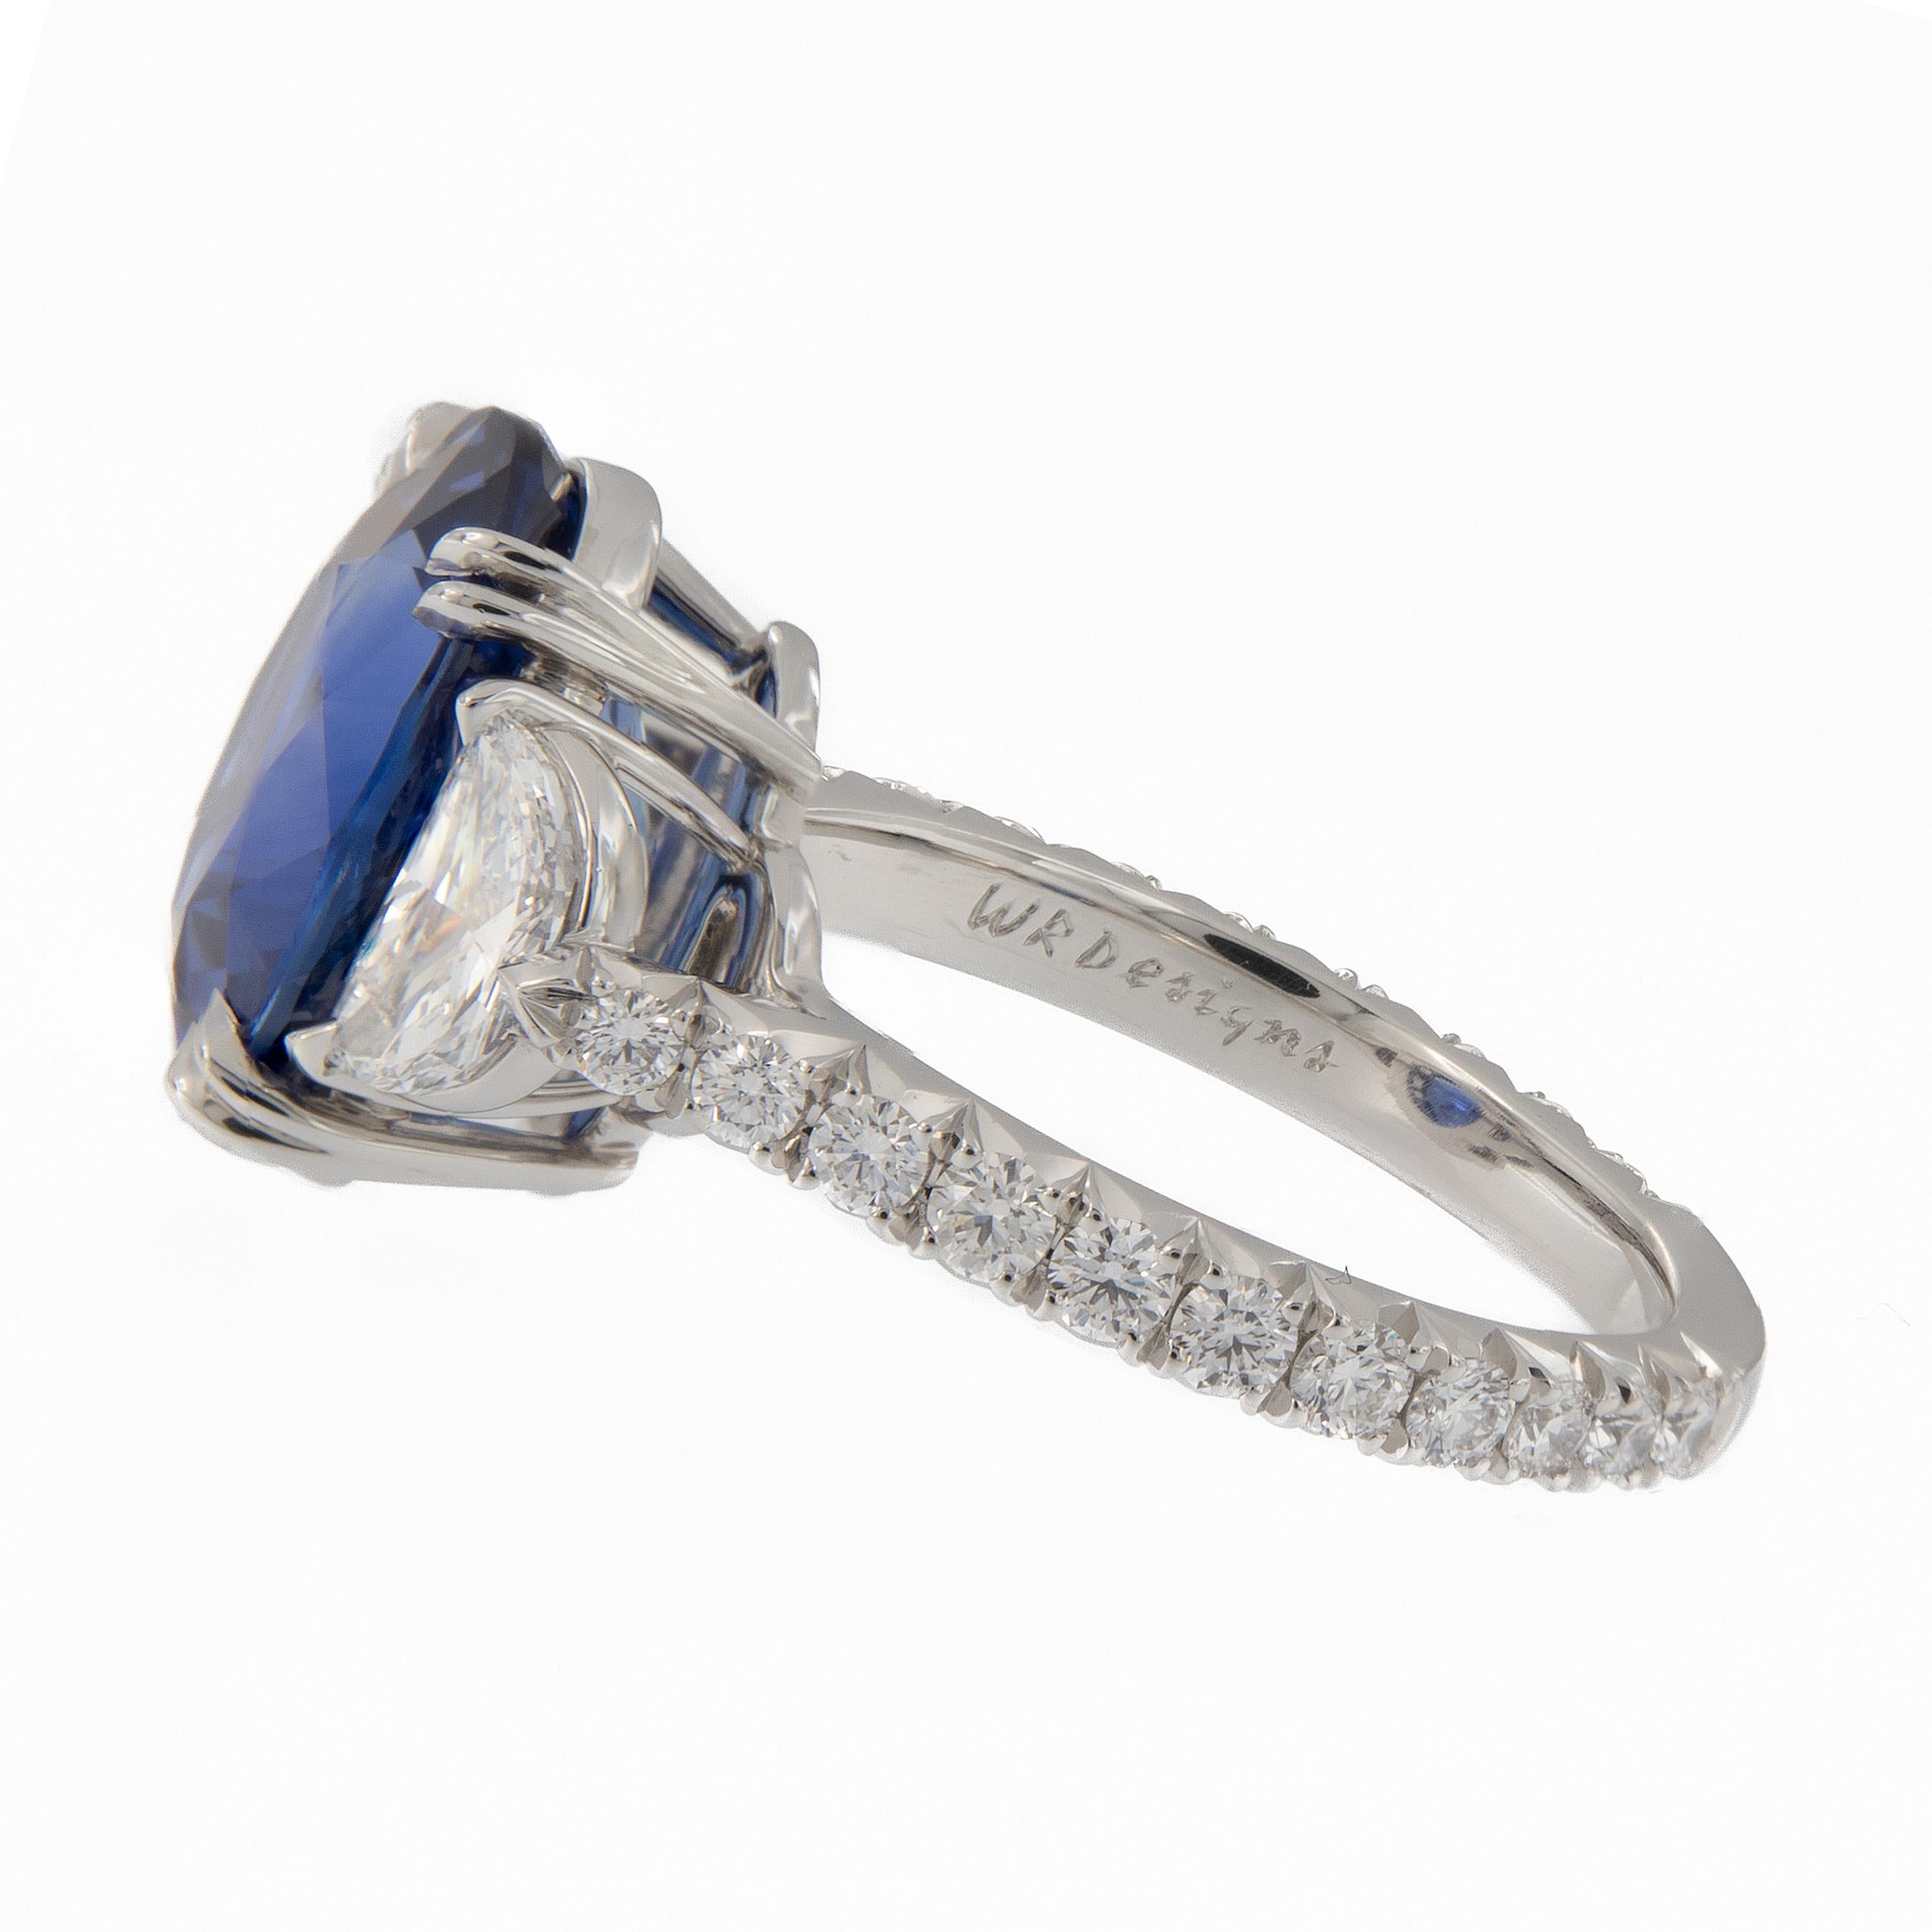 Stunning 6.72 carat oval blue sapphire and two D VS half-moon modified cut diamonds make up this beautiful 3-stone platinum ring. Additional round diamonds sparkle along the ring’s band. Ring Size 6.25. Weighs 8.4 grams

Sapphires 6.72 cttw
Half